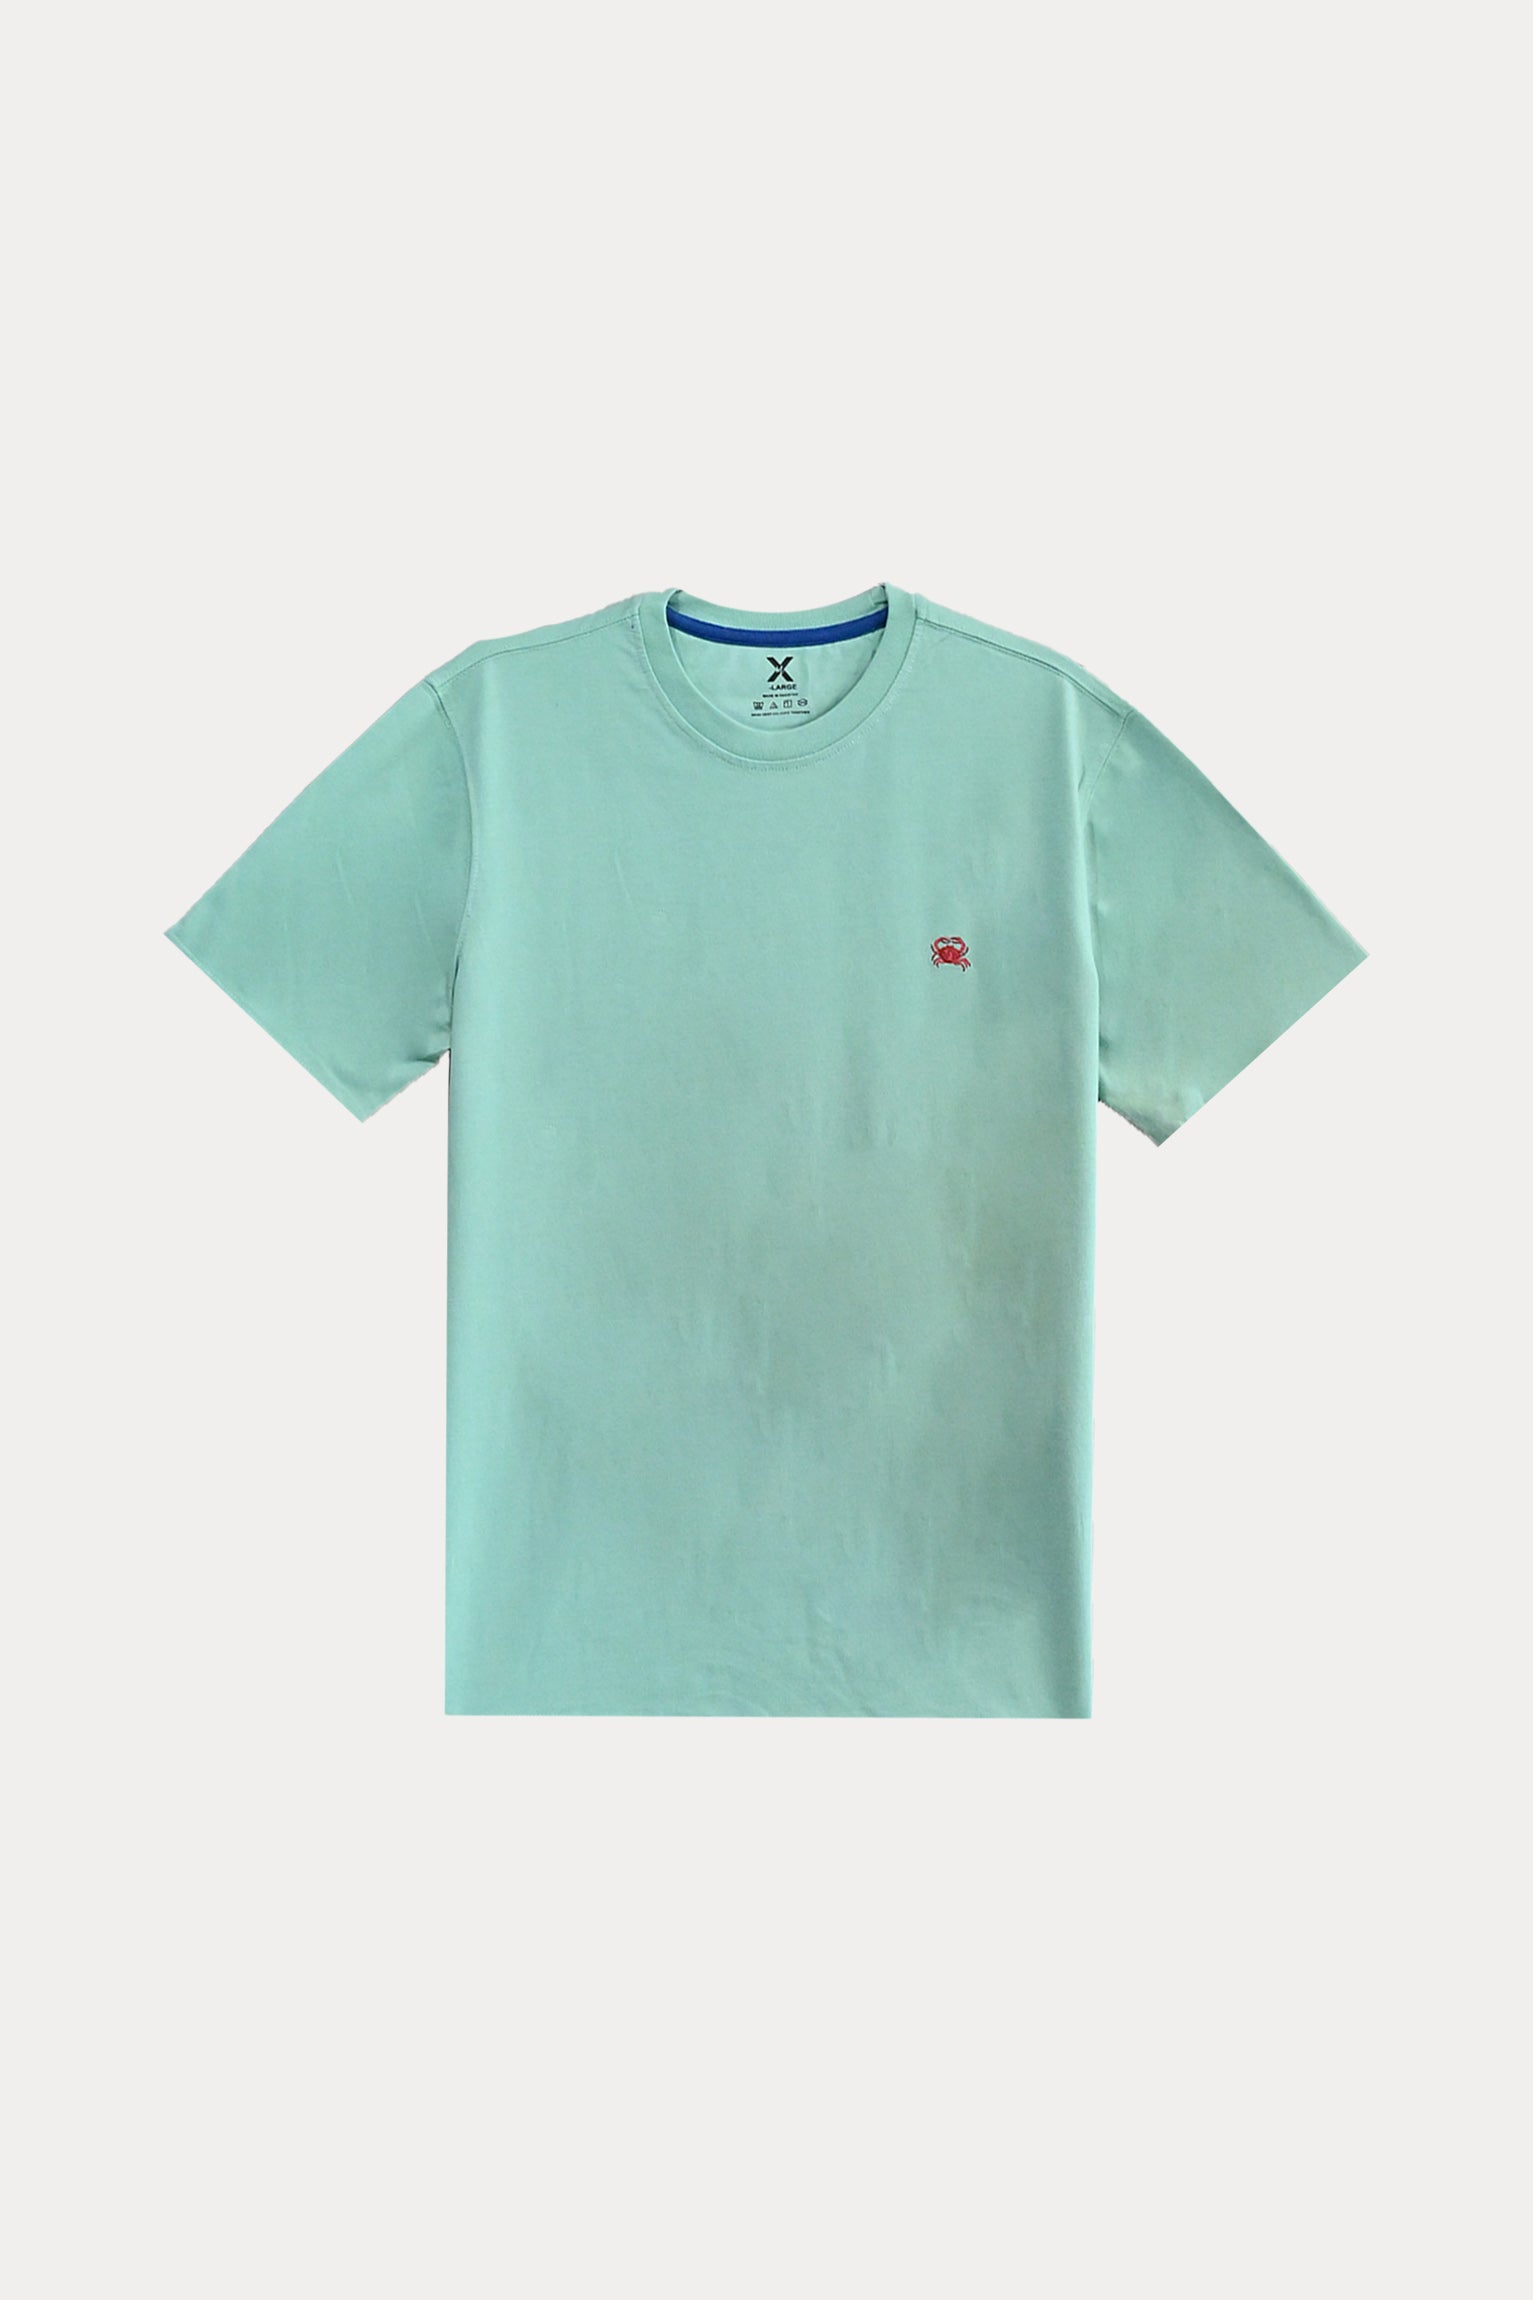 MEN'S S/S EMBROIDERED TEE